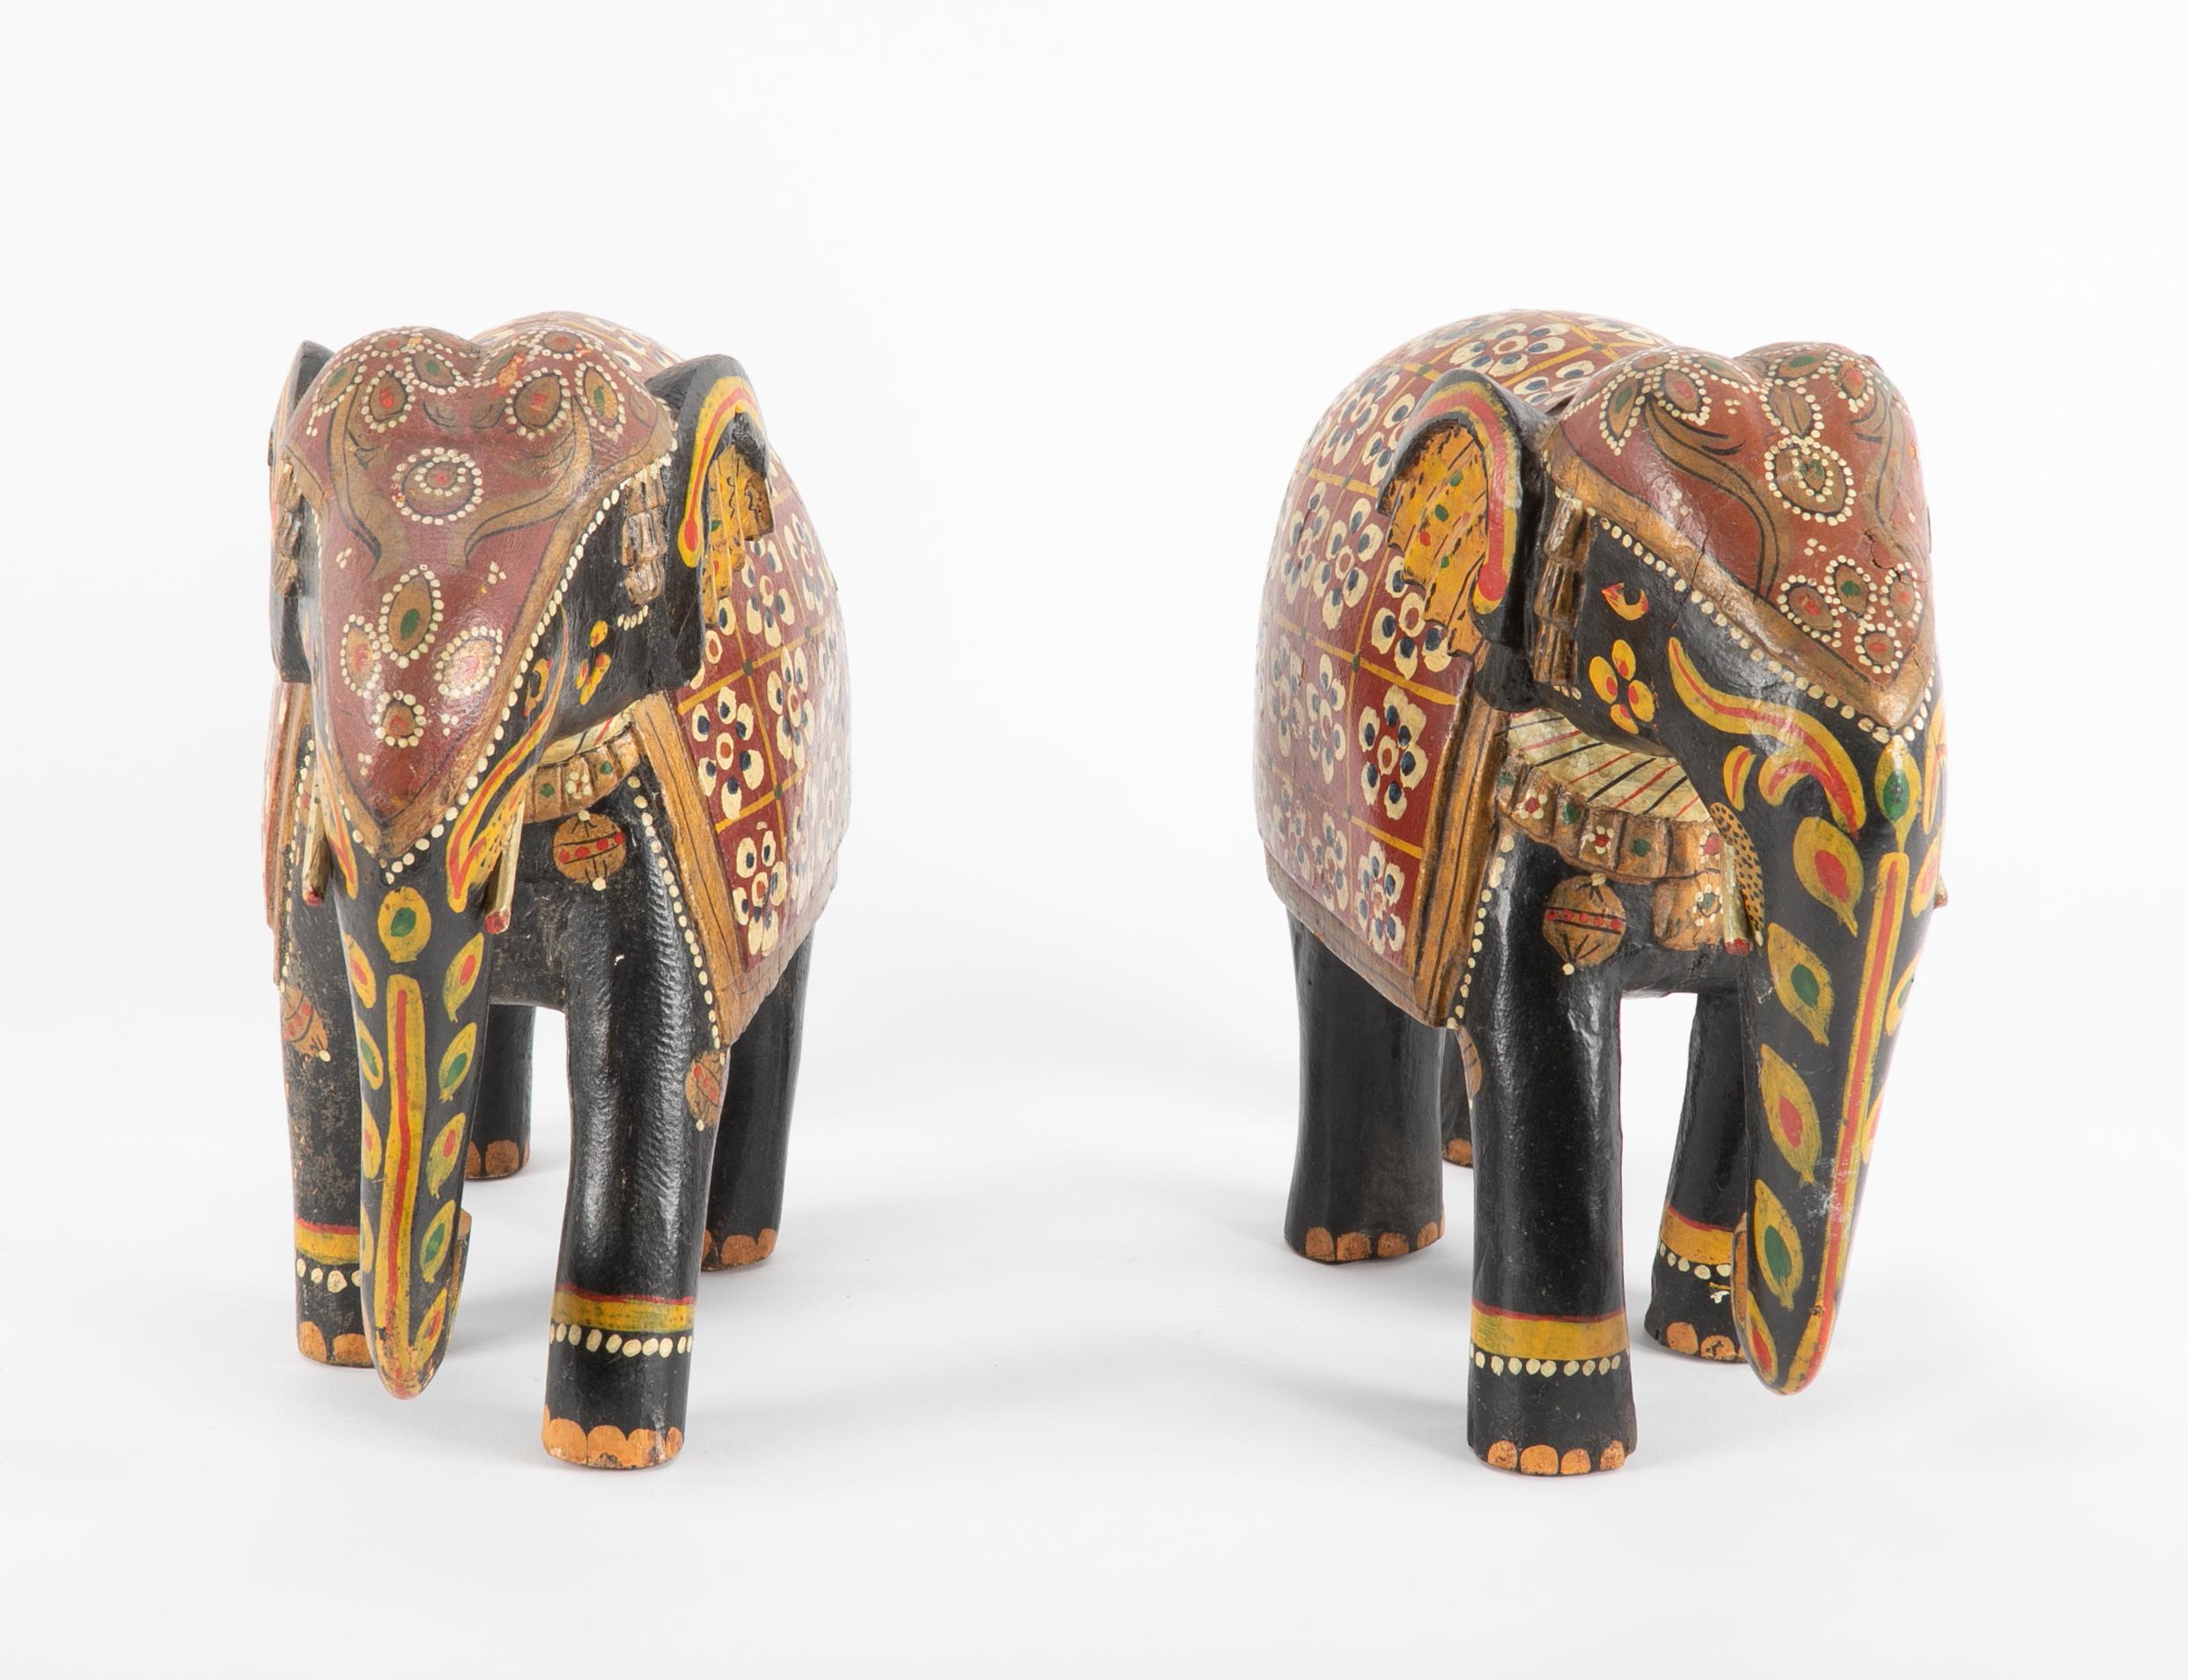 A 19th century wood carved pair of Asian elephants purchased in the 1930s. circa mid-1800s. 

